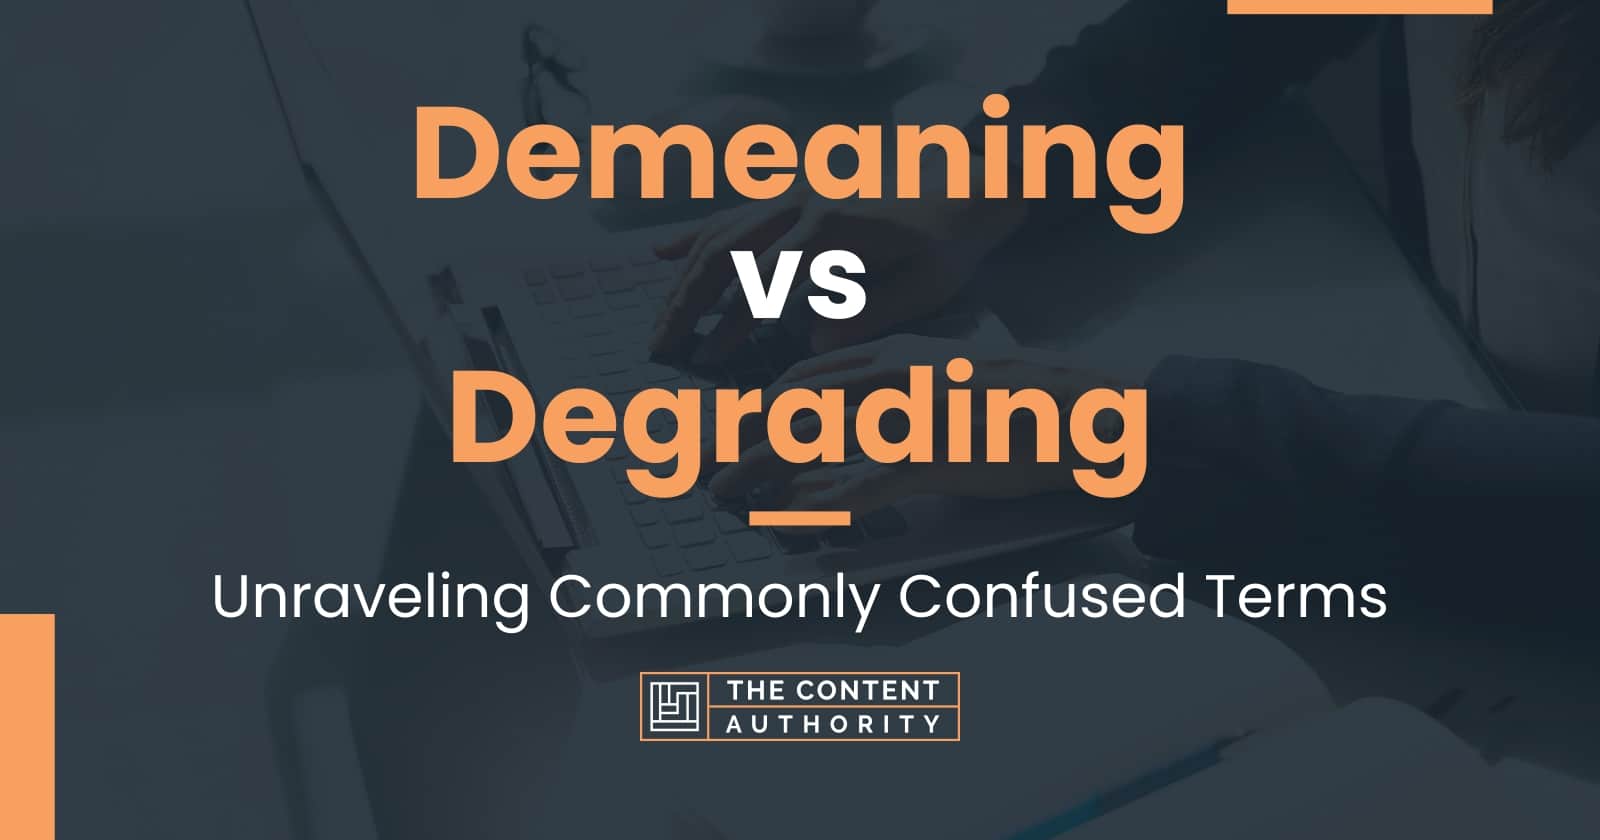 Demeaning vs Degrading: Unraveling Commonly Confused Terms